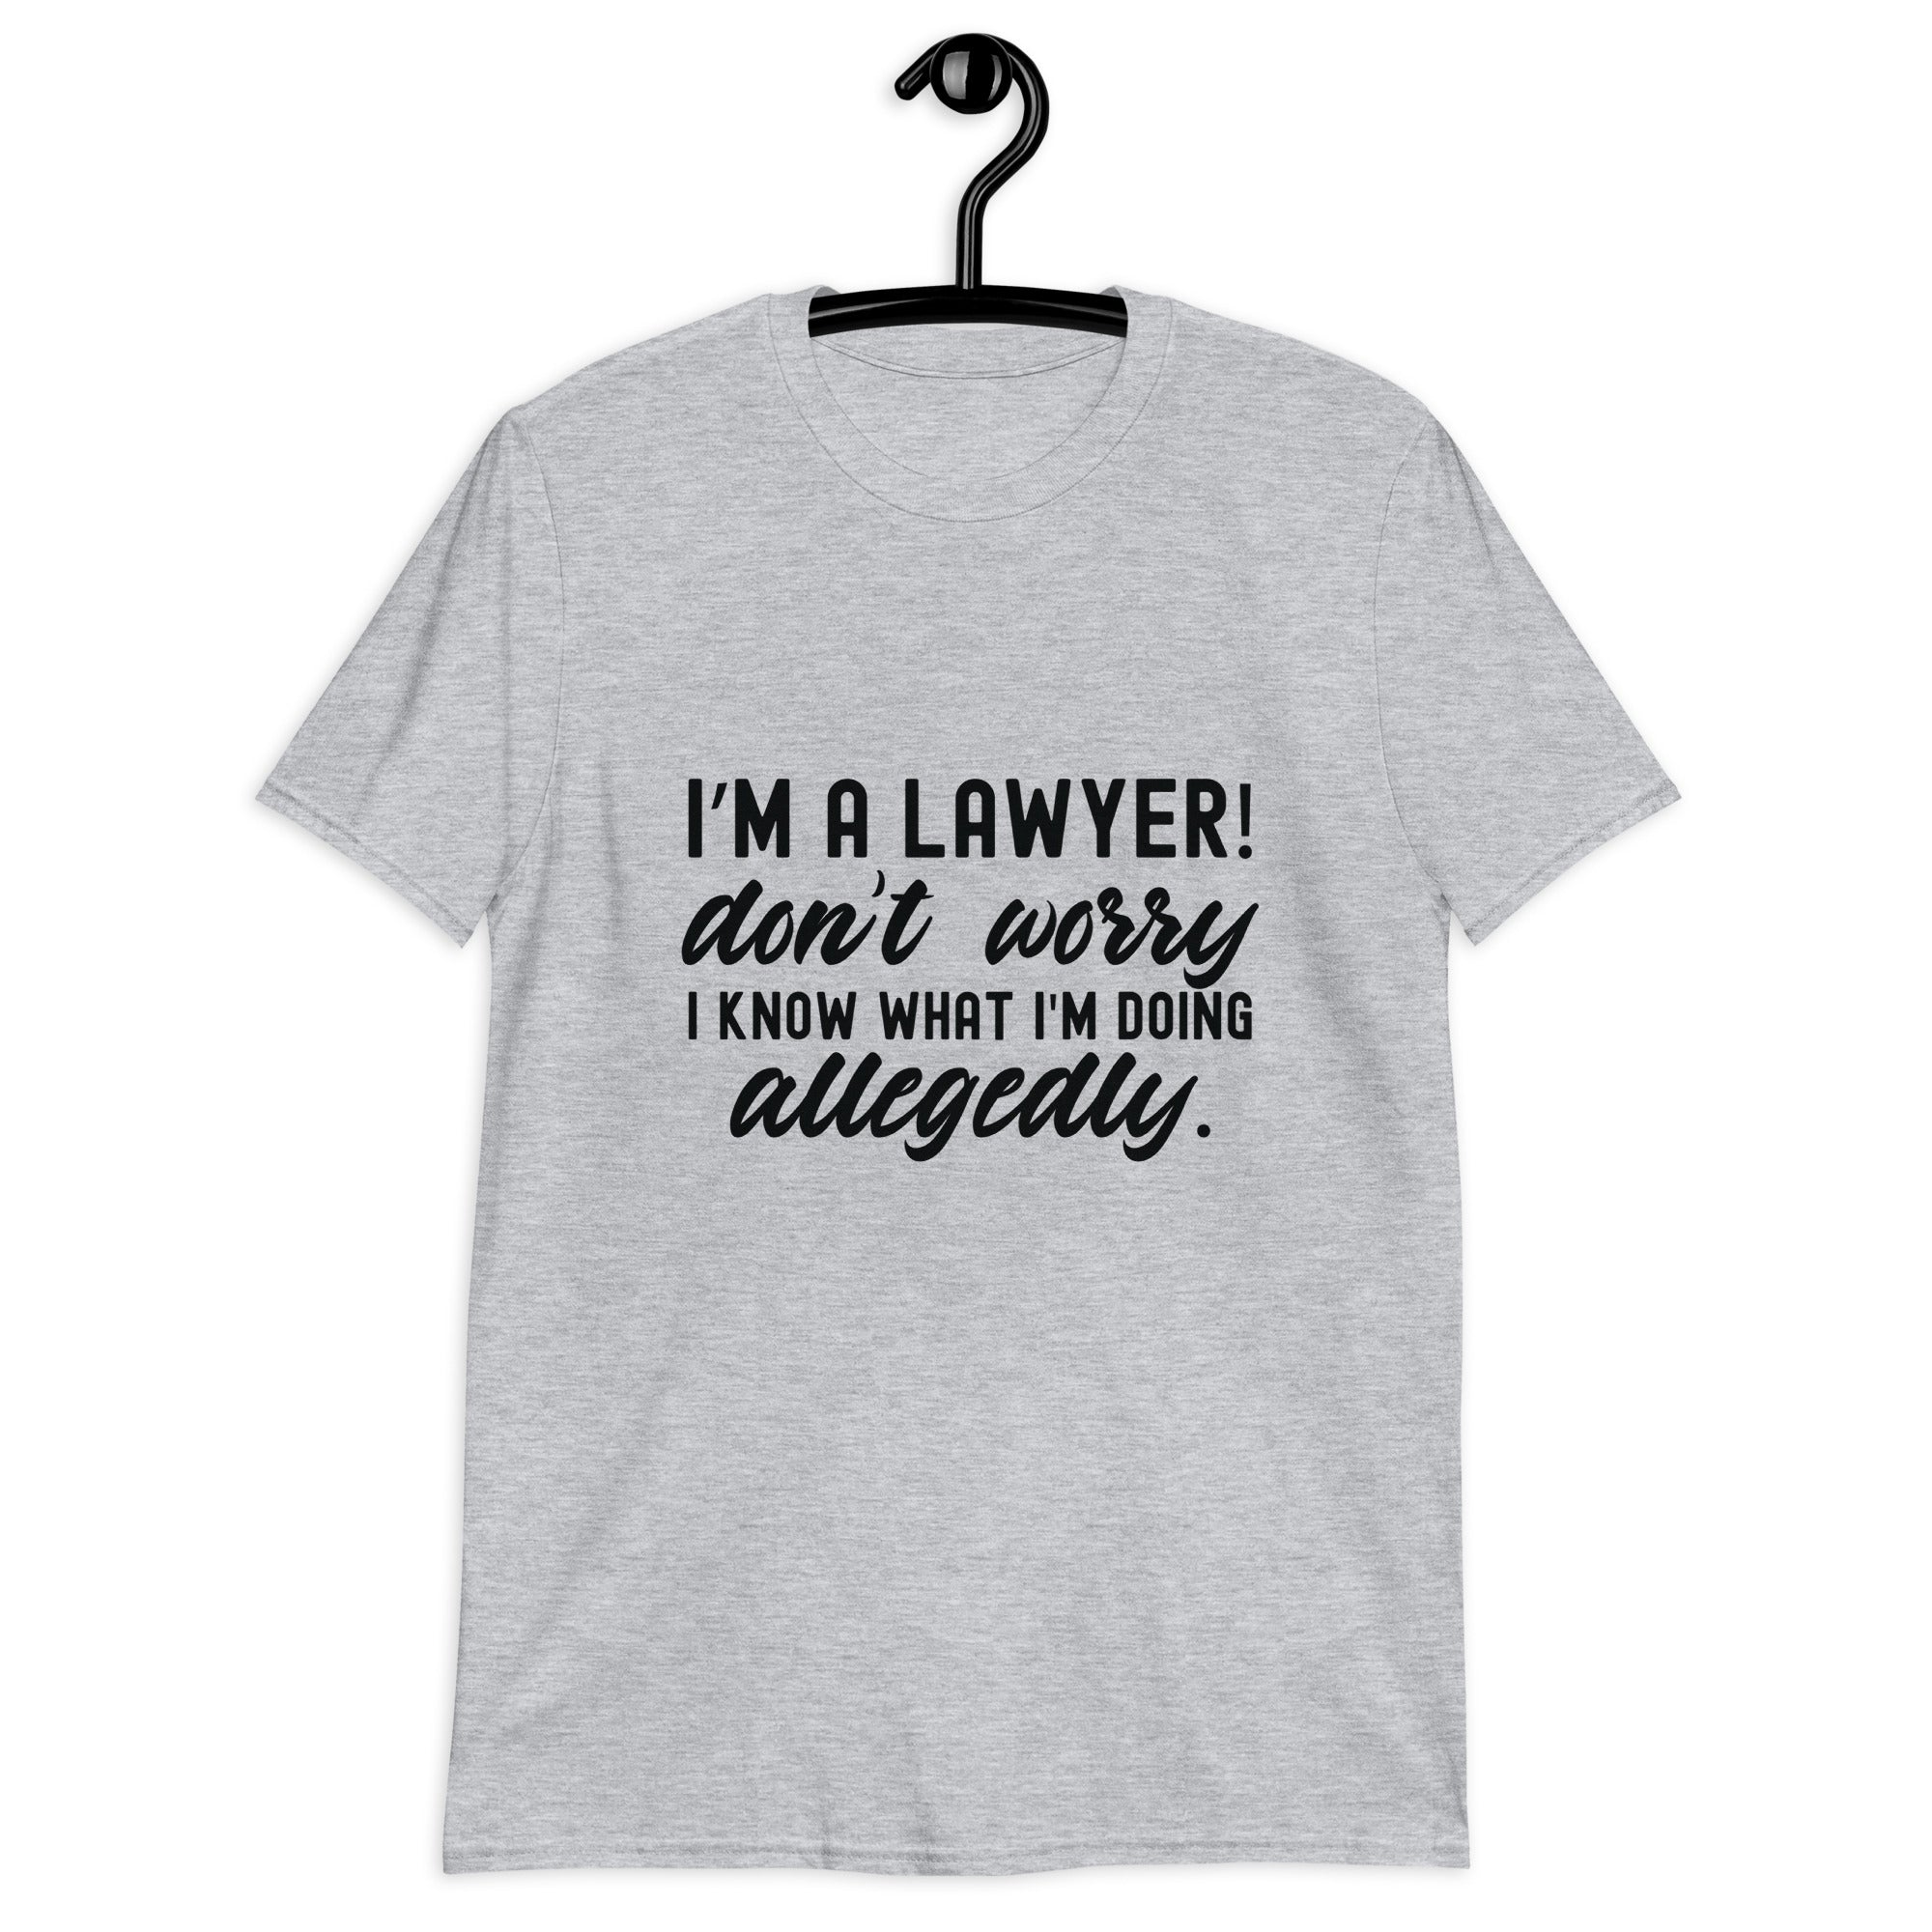 Short-Sleeve Unisex T-Shirt |  I’m a lawyer don’t worry I know what I'm doing (allegedly)